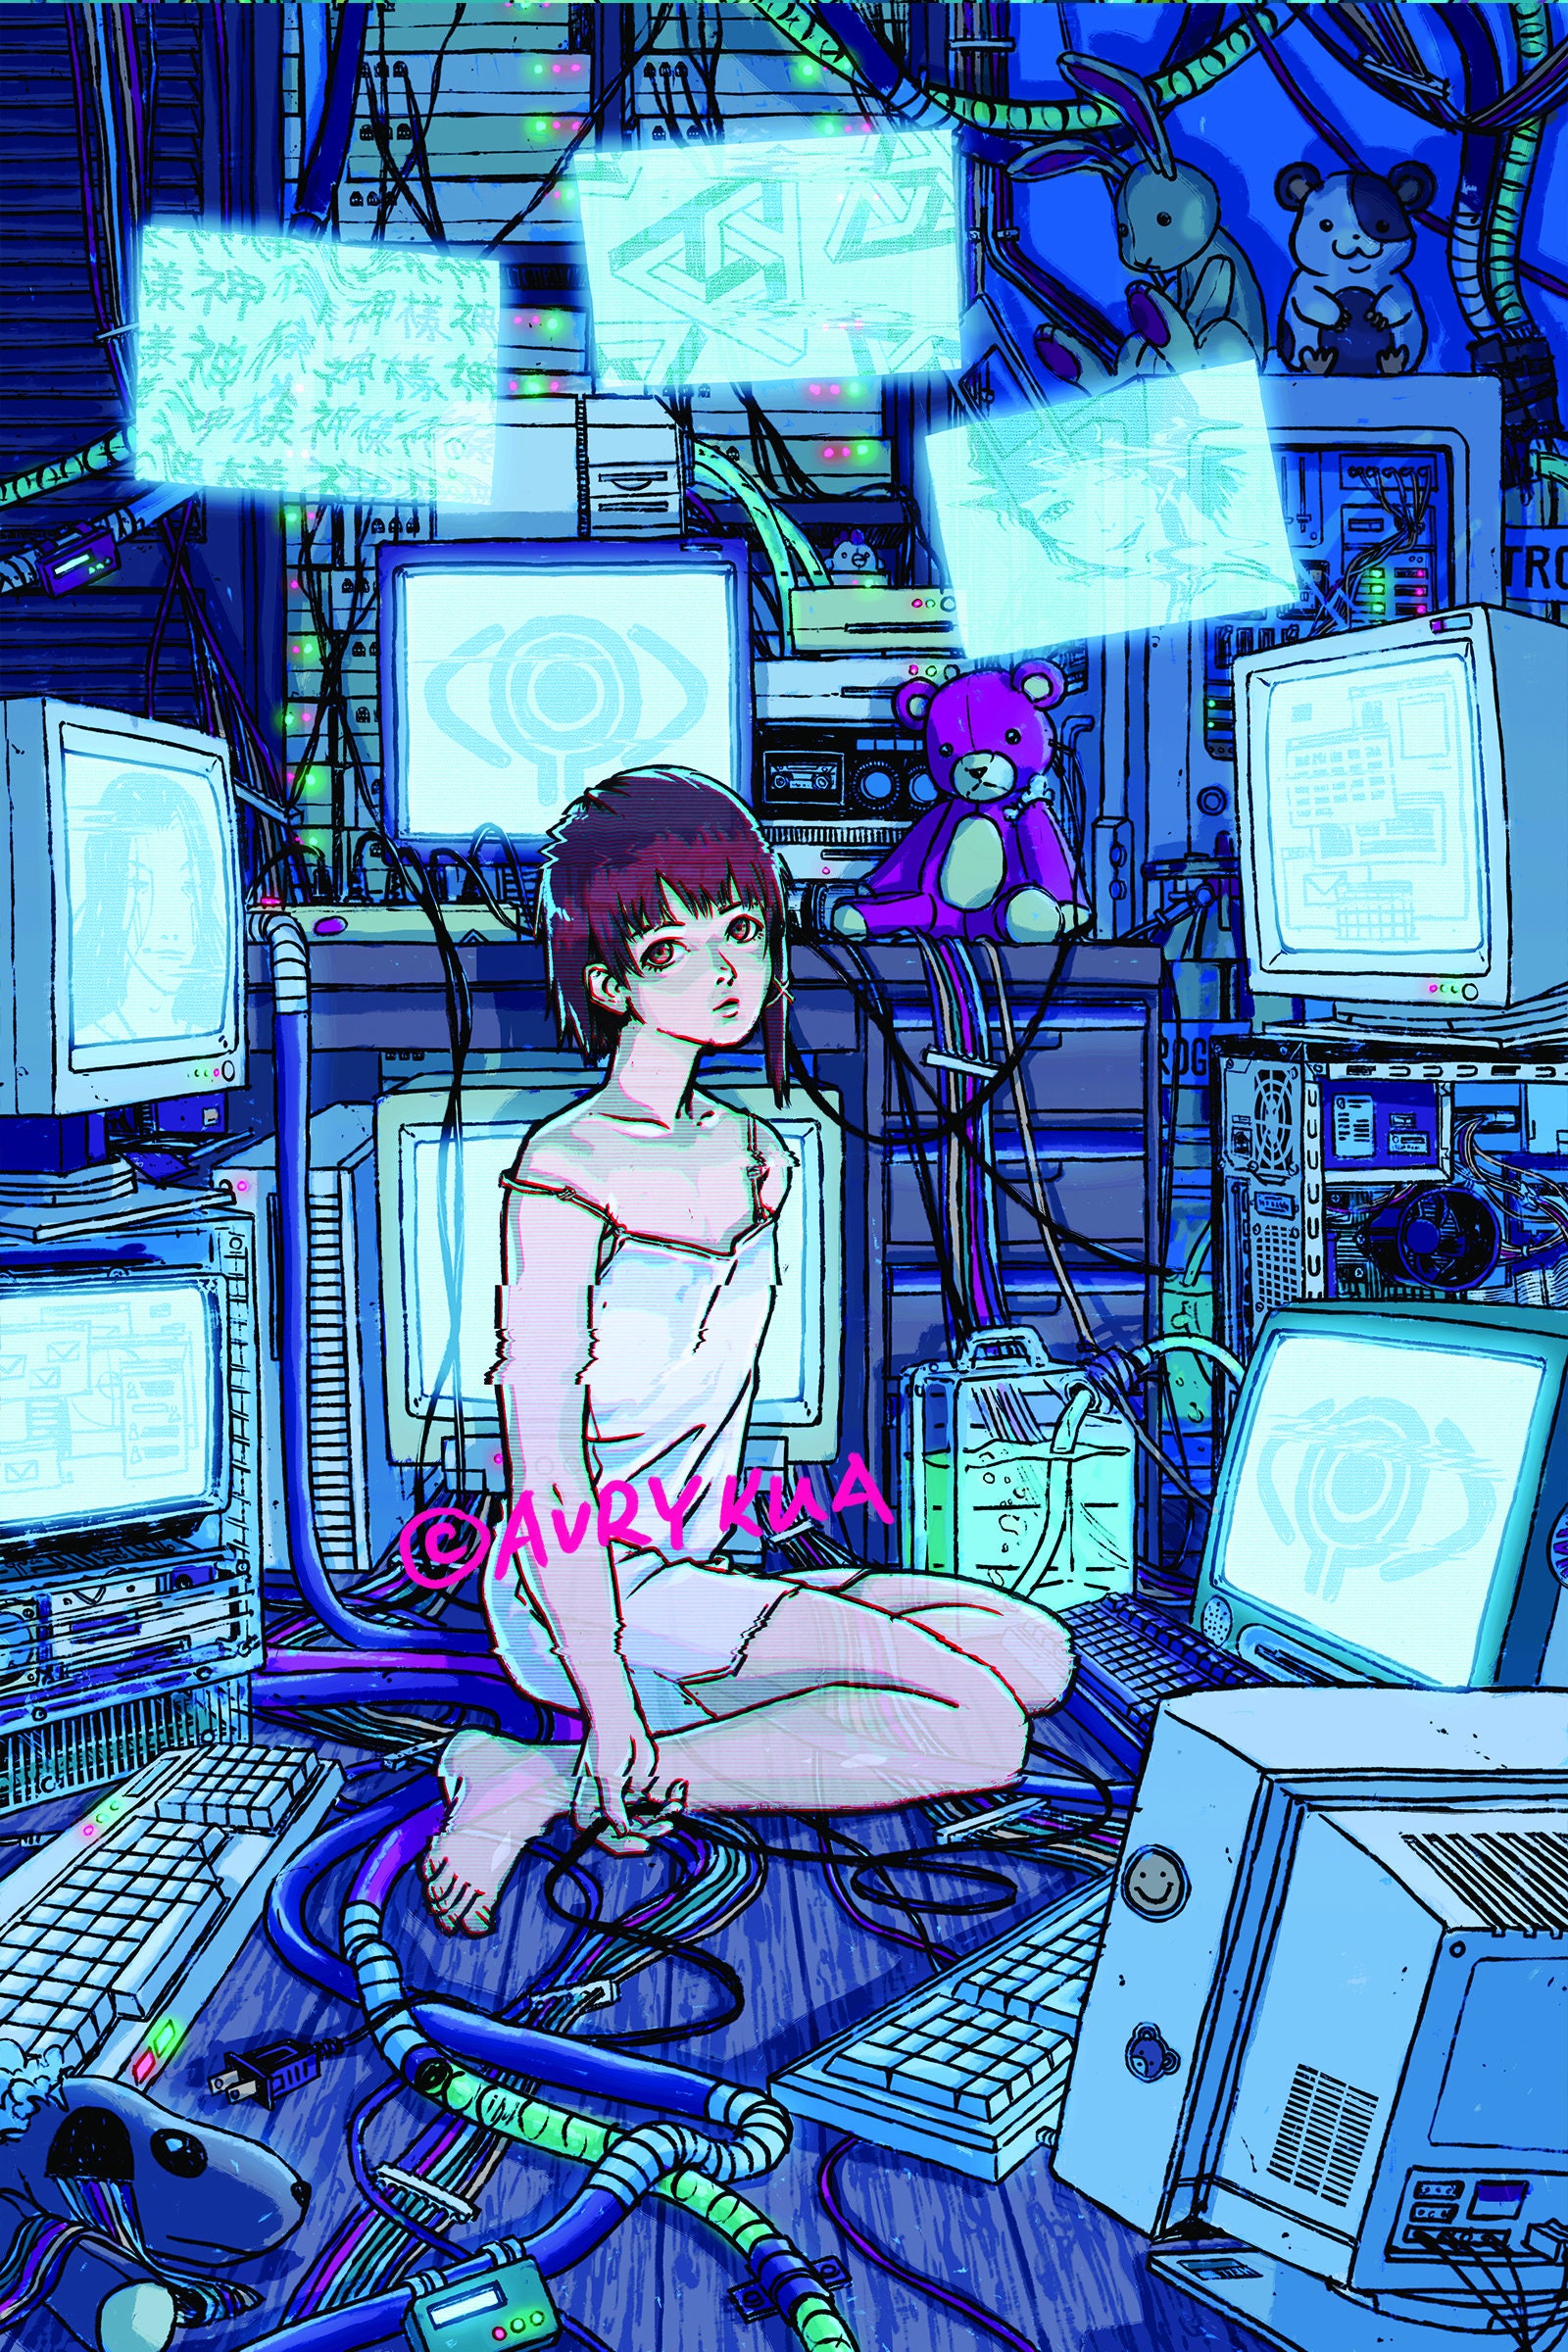 Serial Experiments Lain] r/anime and r/animesuggest are privated